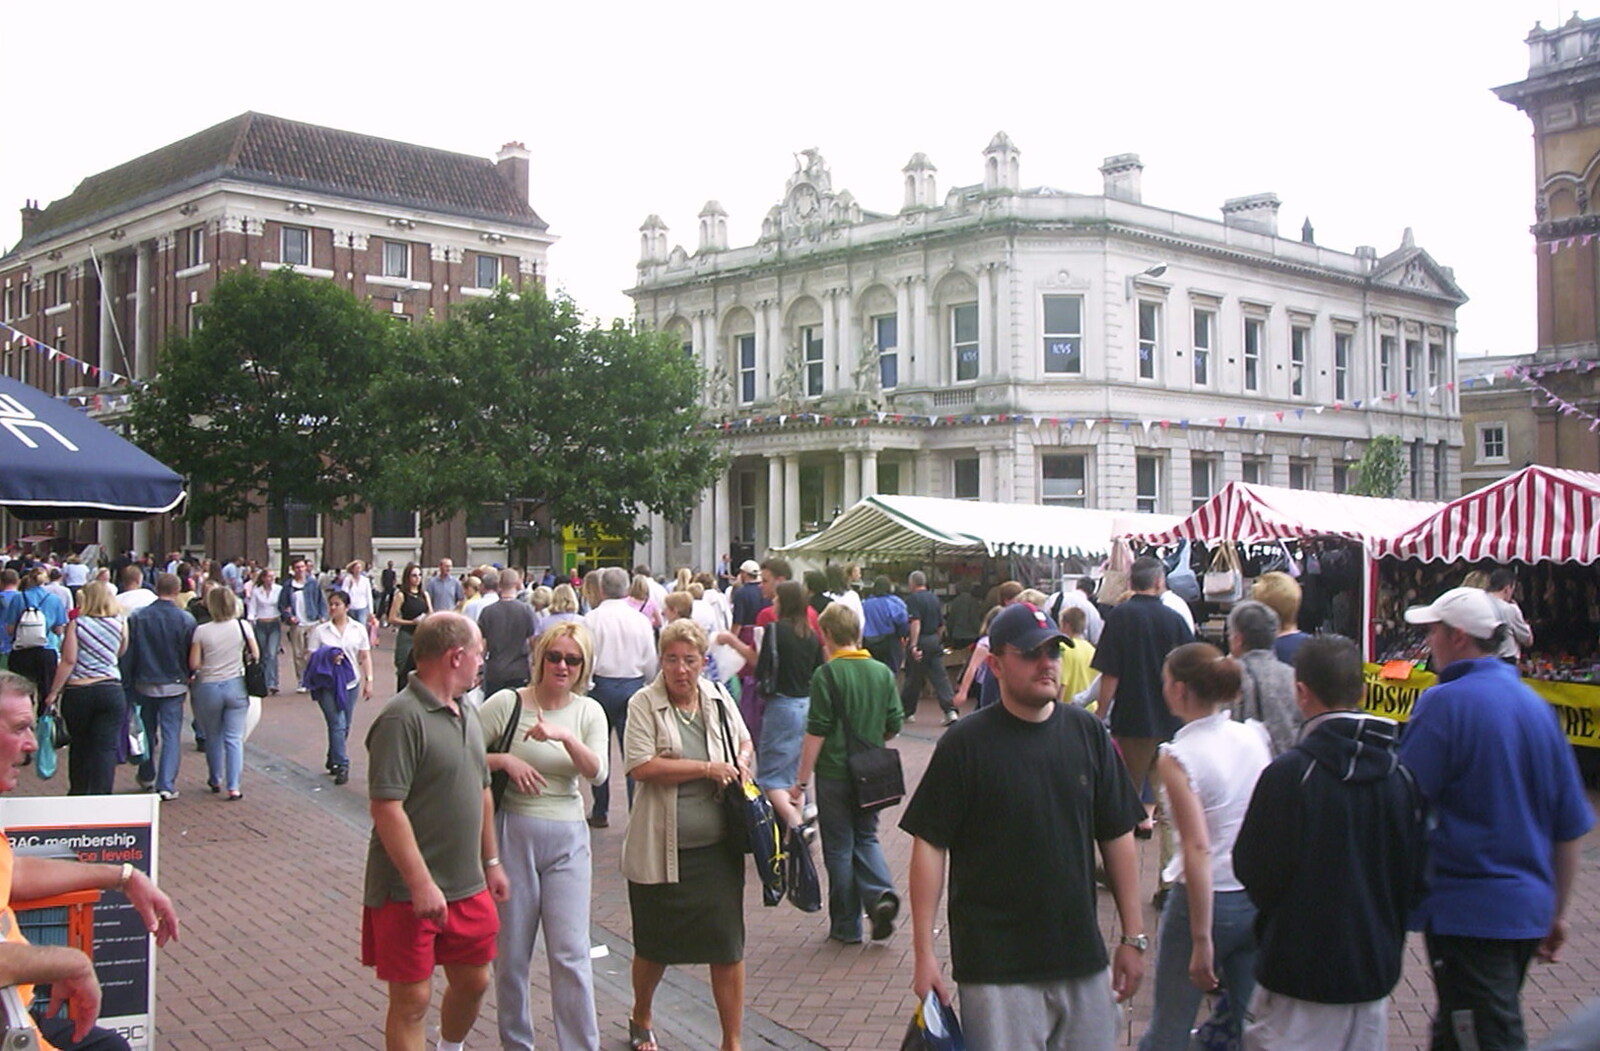 The market place in Ipswich from Radio 1's One Big Sunday, Chantry Park, Ipswich - 14th July 2002